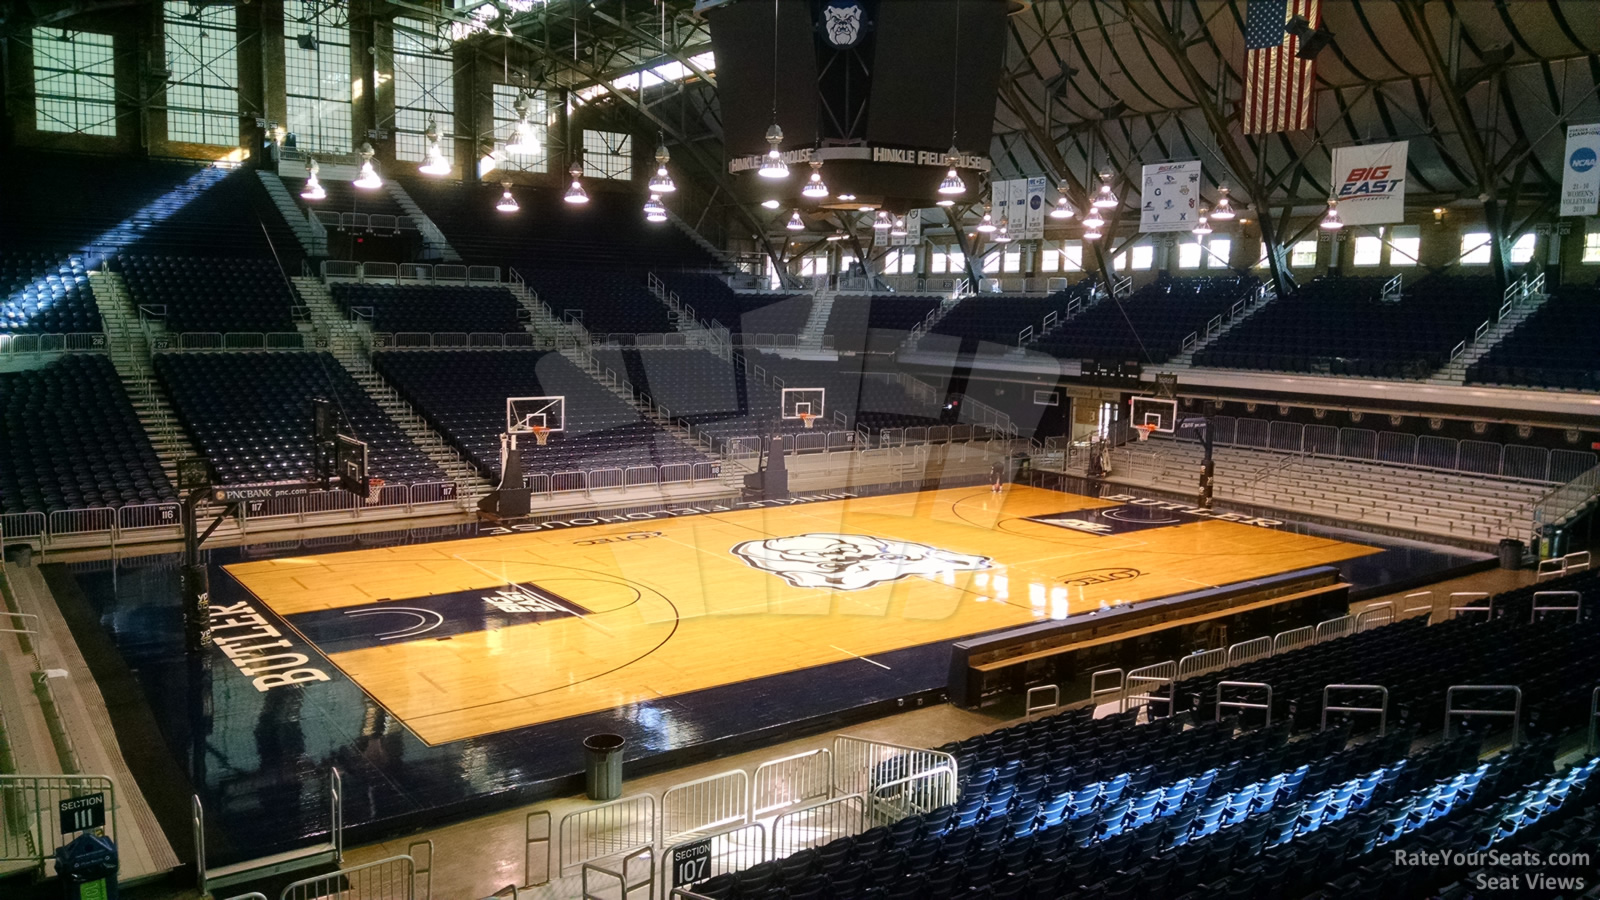 Hinkle Fieldhouse Section 209 - RateYourSeats.com